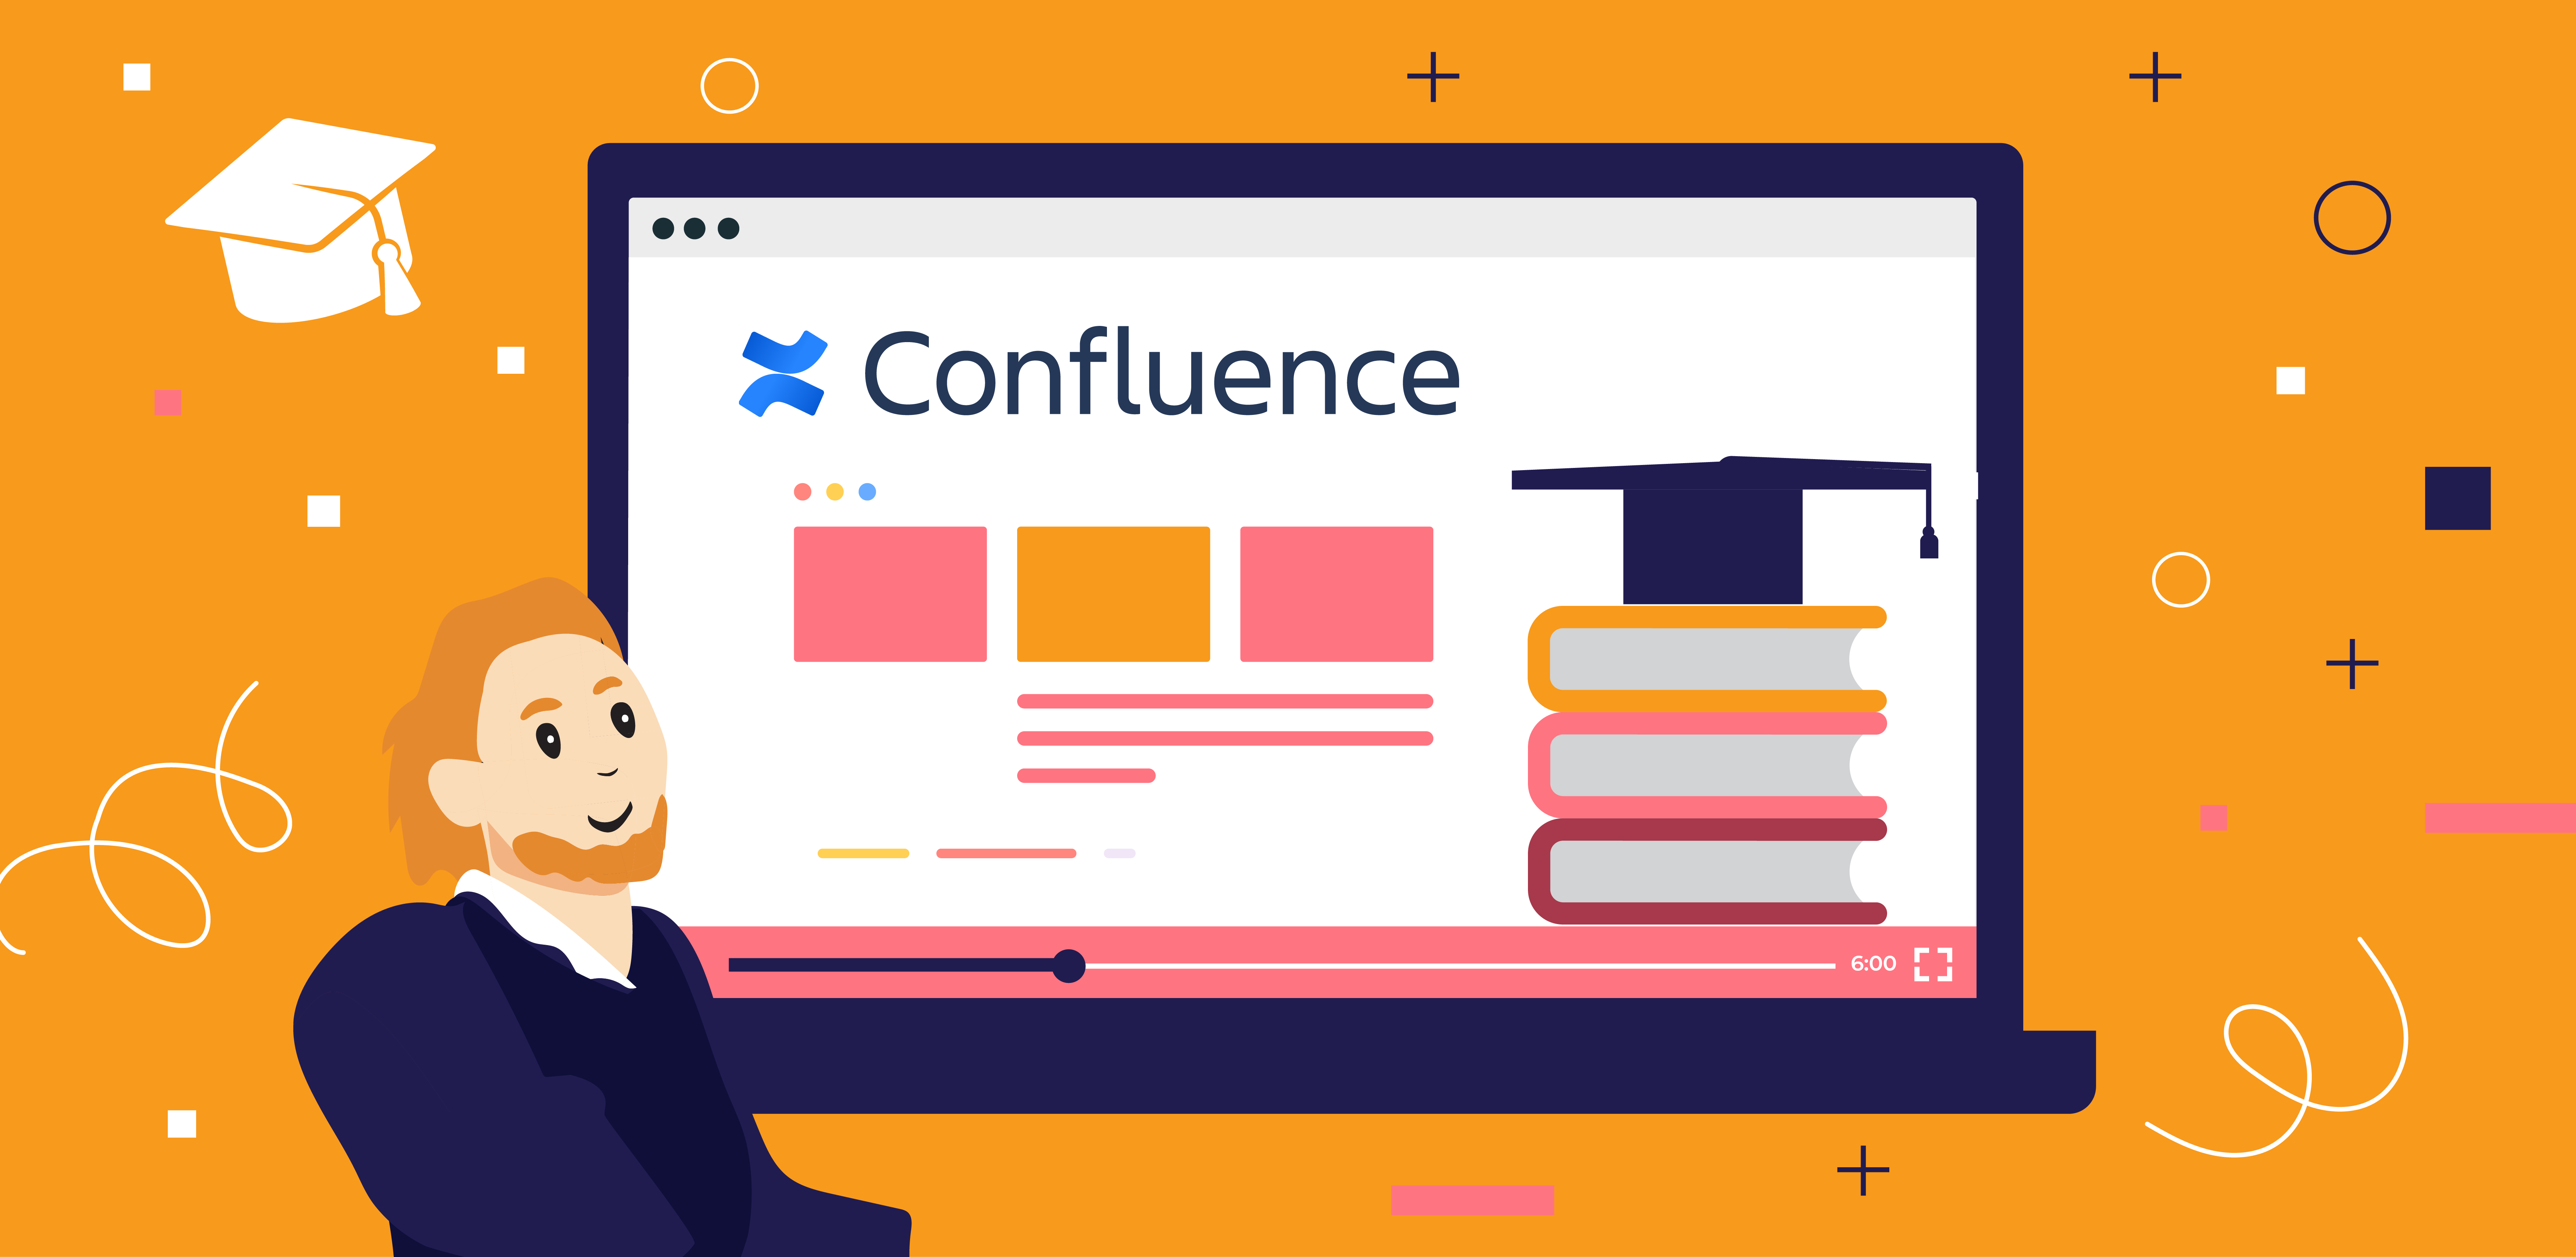 If You Use Confluence, Your New LMS Could Be Hiding in Plain Sight